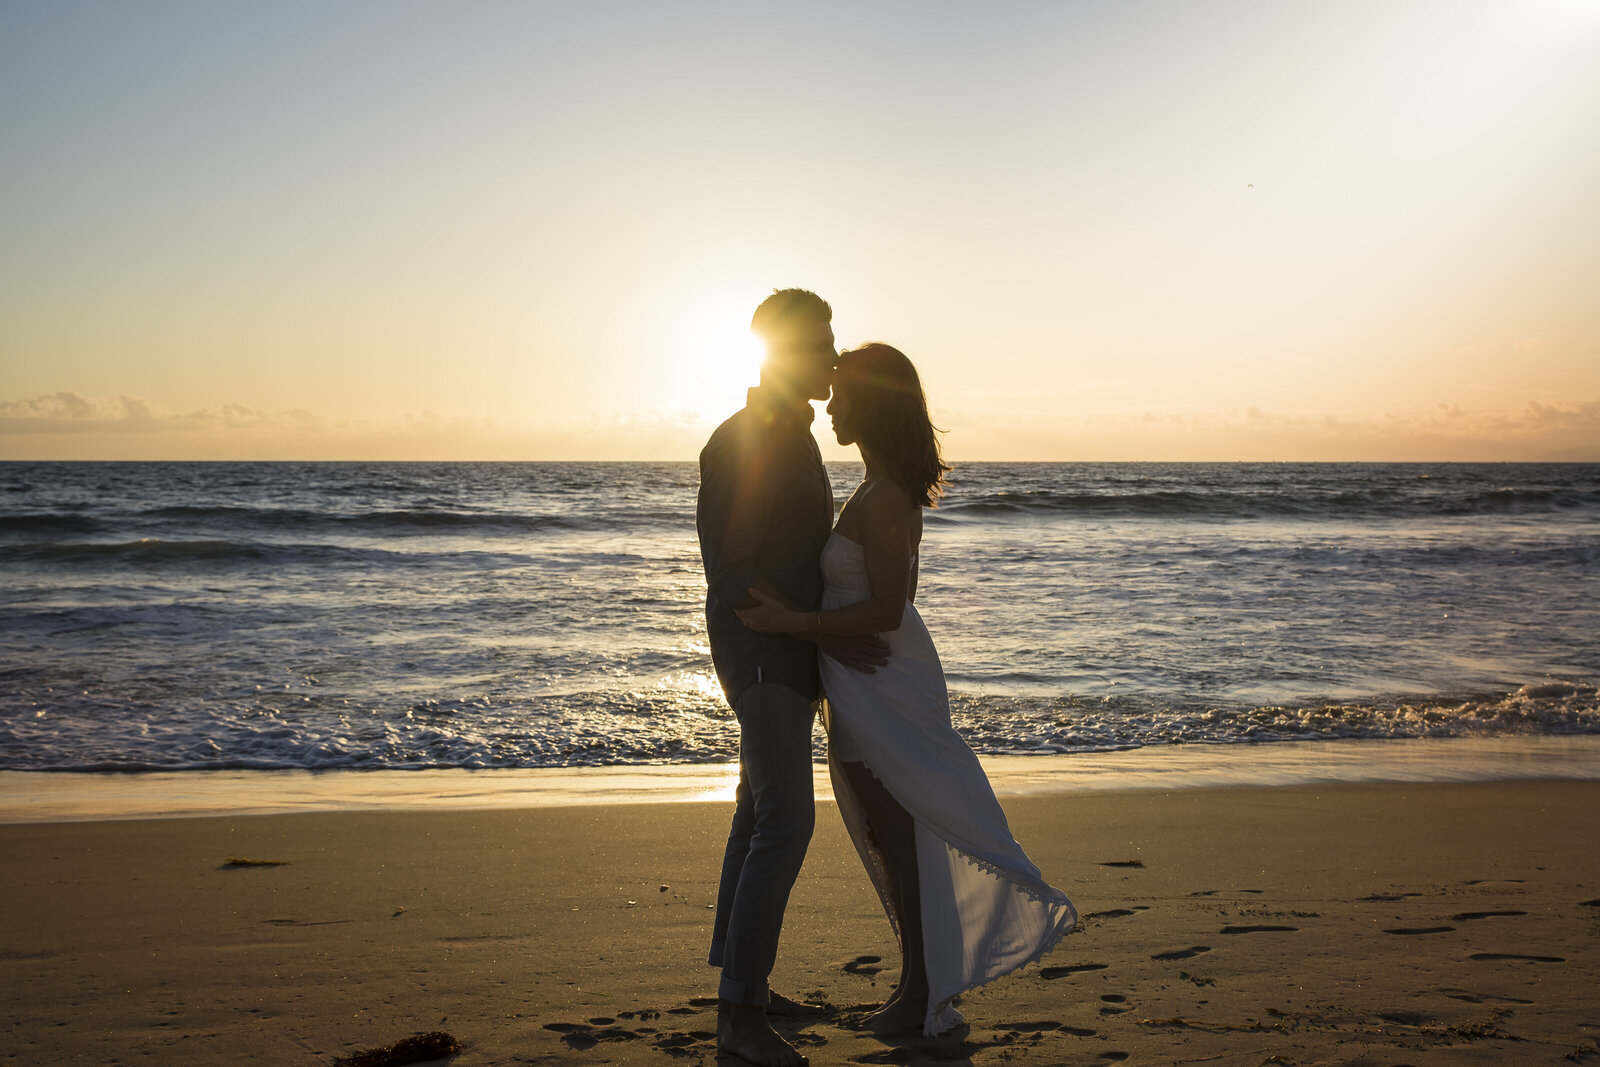 Couple stands on the beach at sunset and the man kisses the woman's forehead.